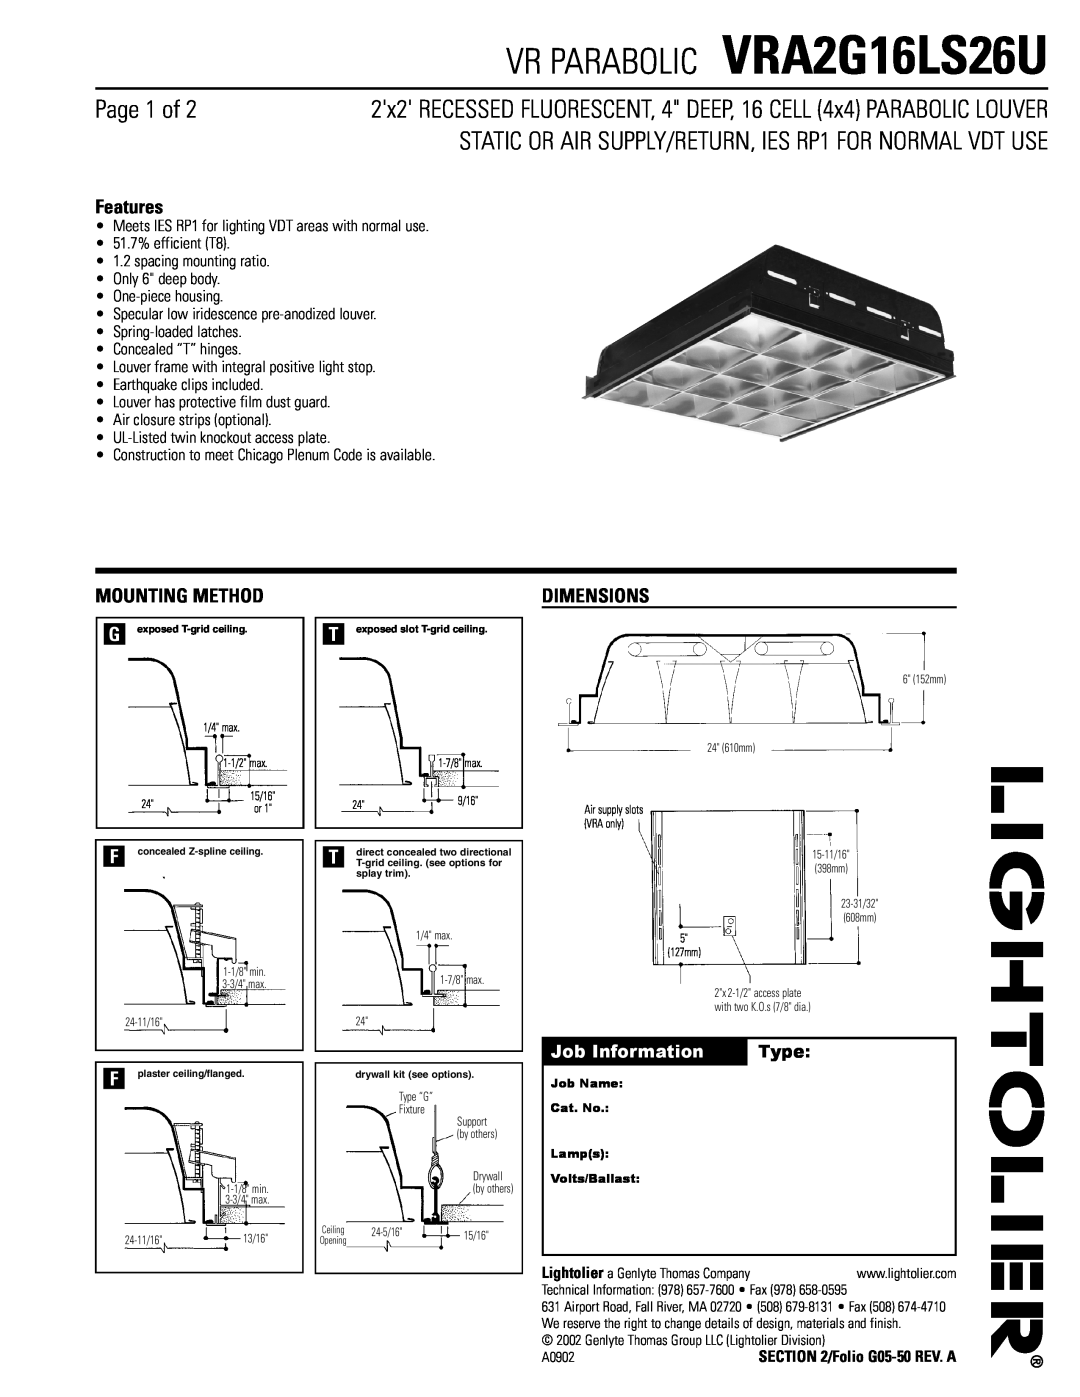 Lightolier dimensions VR PARABOLIC VRA2G16LS26U, Page 1 of, Features, Mounting Method, Dimensions, Job Information 